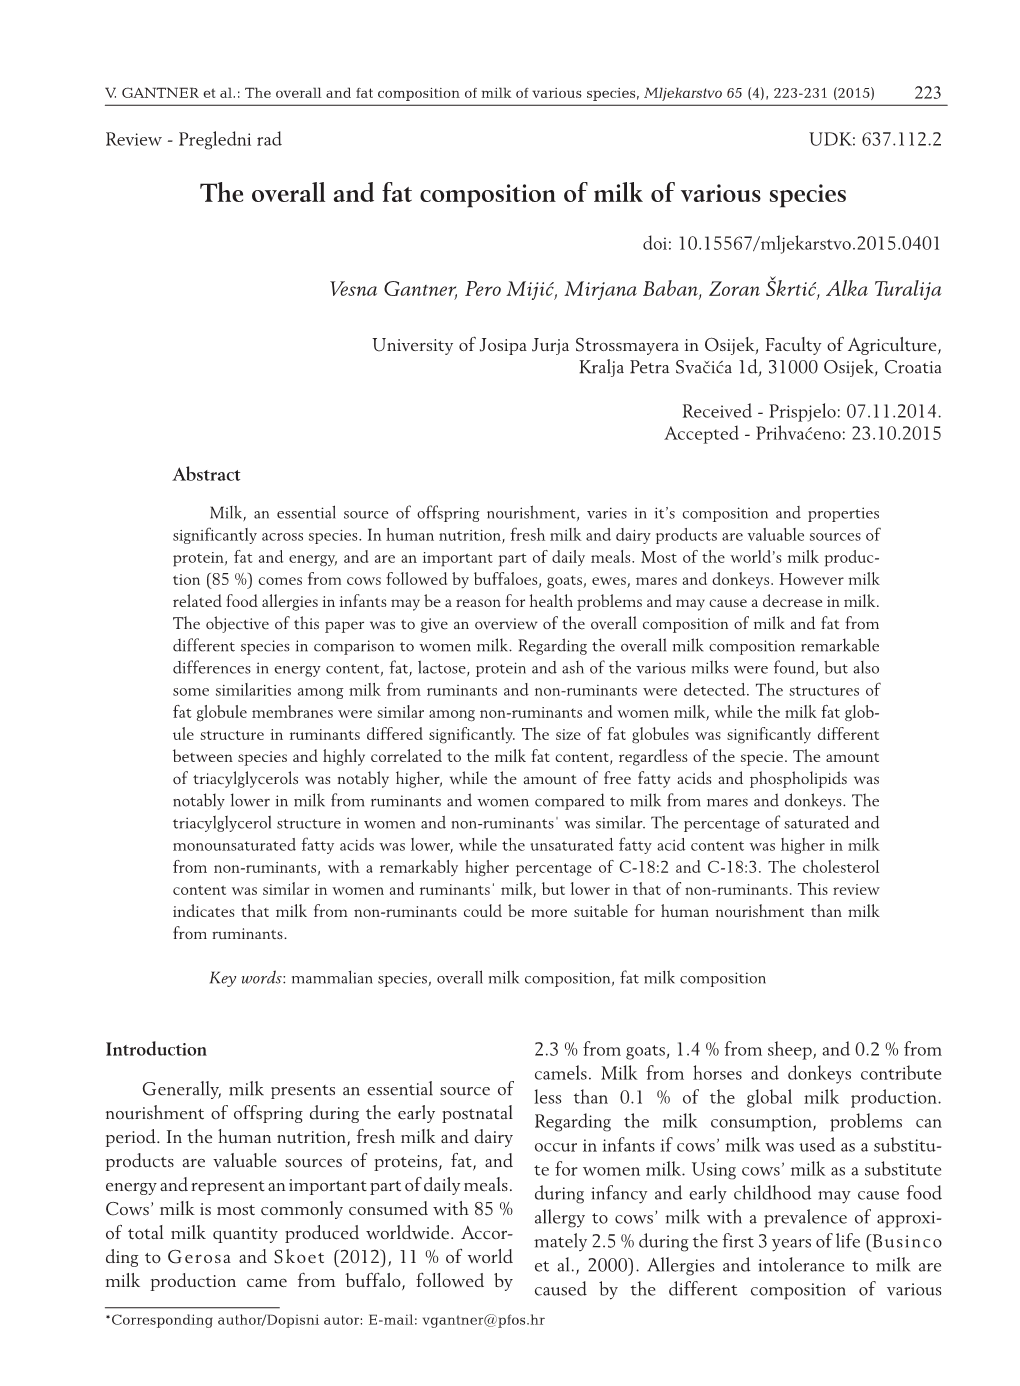 The Overall and Fat Composition of Milk of Various Species, Mljekarstvo 65 (4), 223-231 (2015) 223